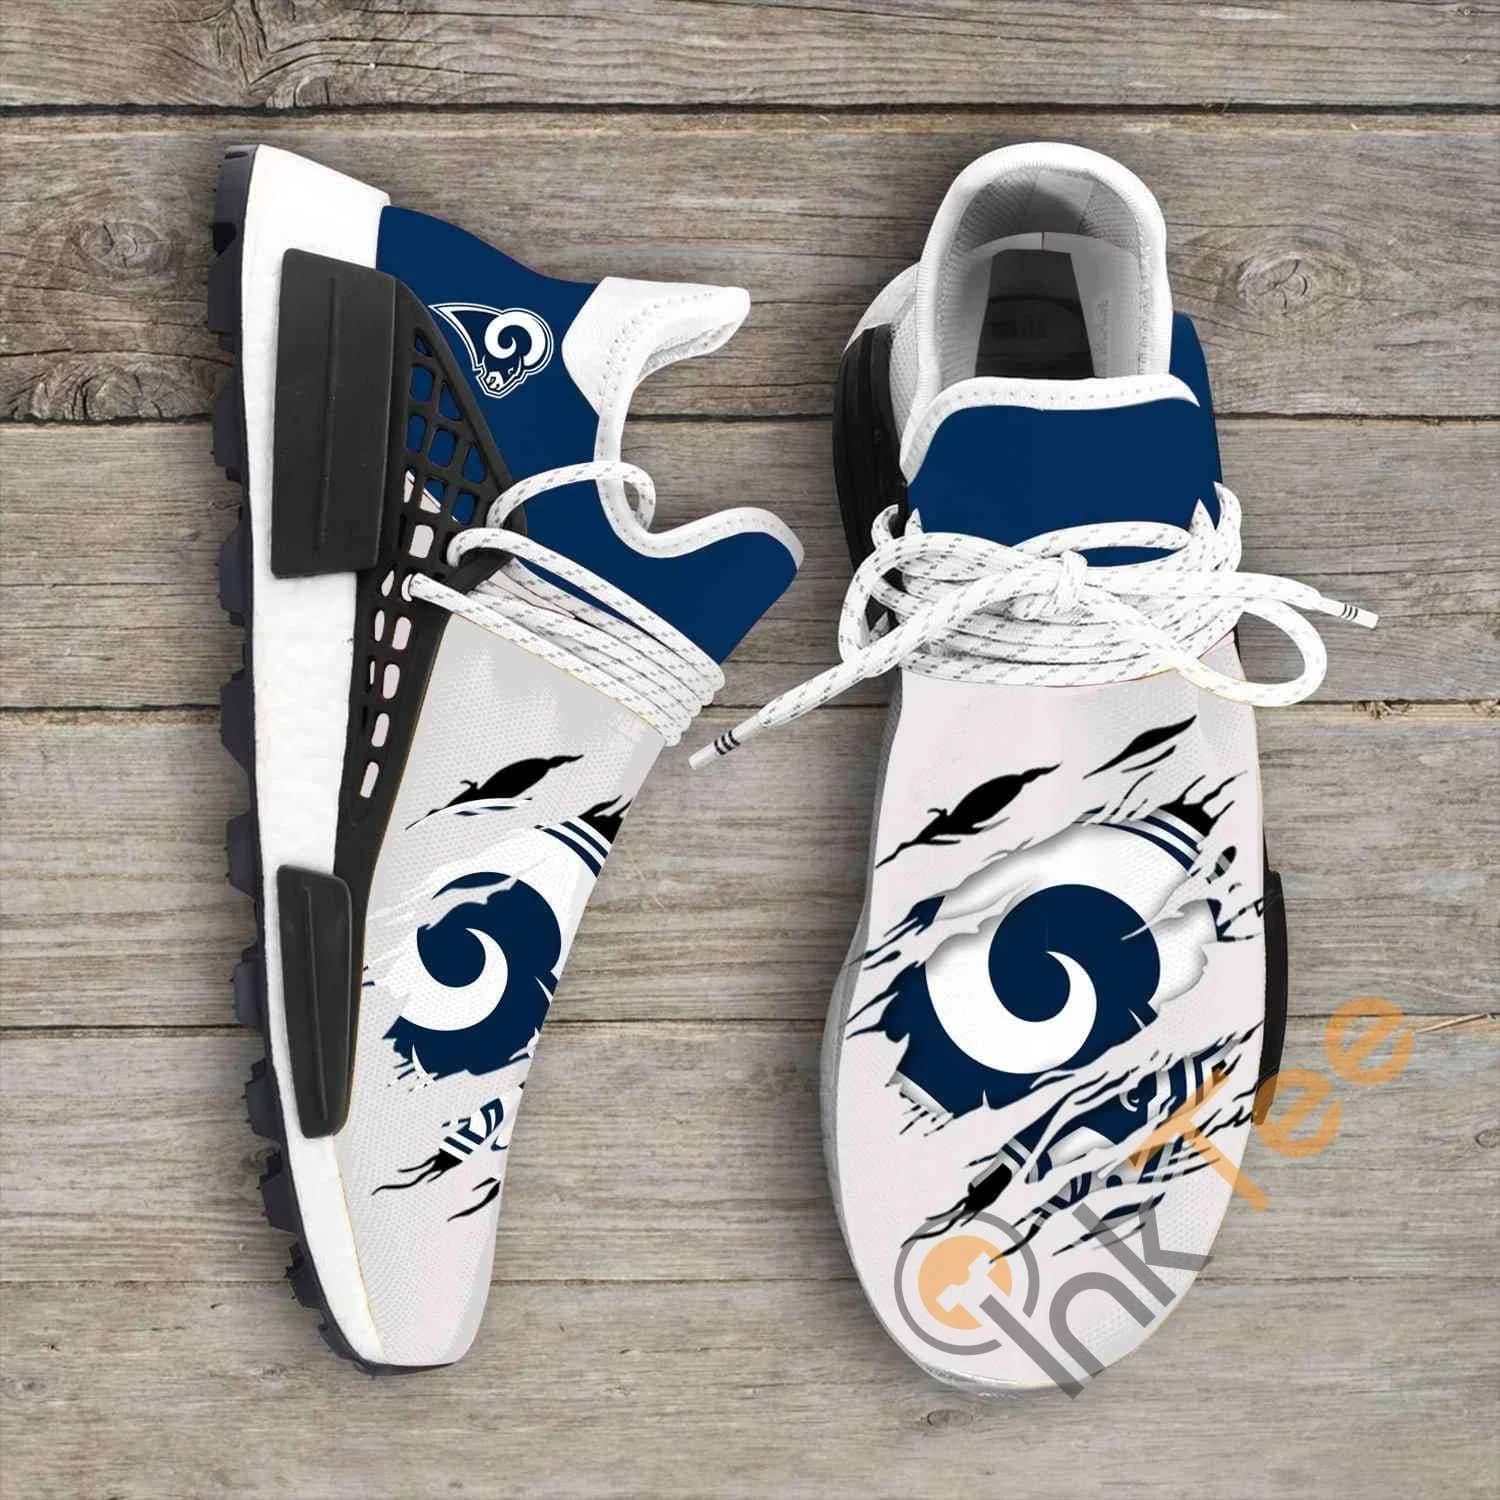 Los Angeles Rams Nfl Nmd Human Shoes